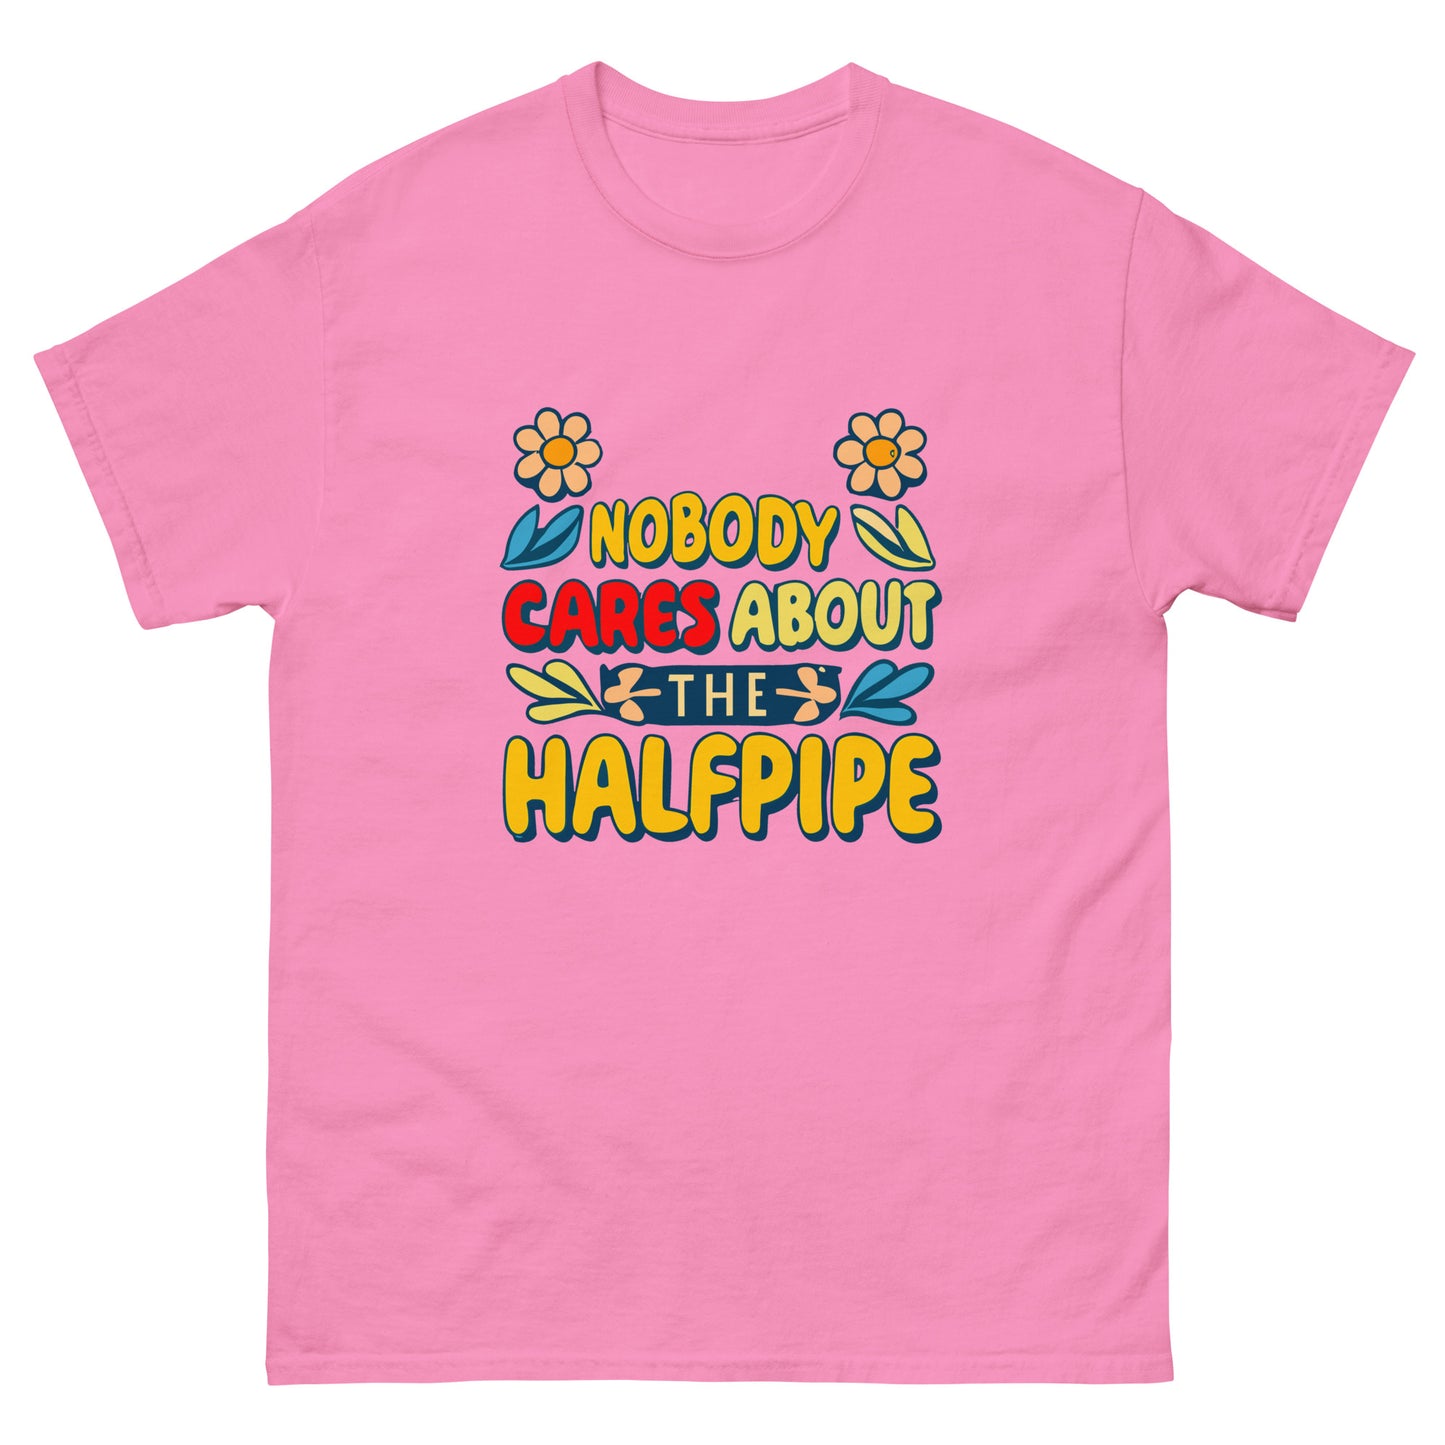 Nobody cares about the halfpipe t-shirt printed by Whistler Shirts